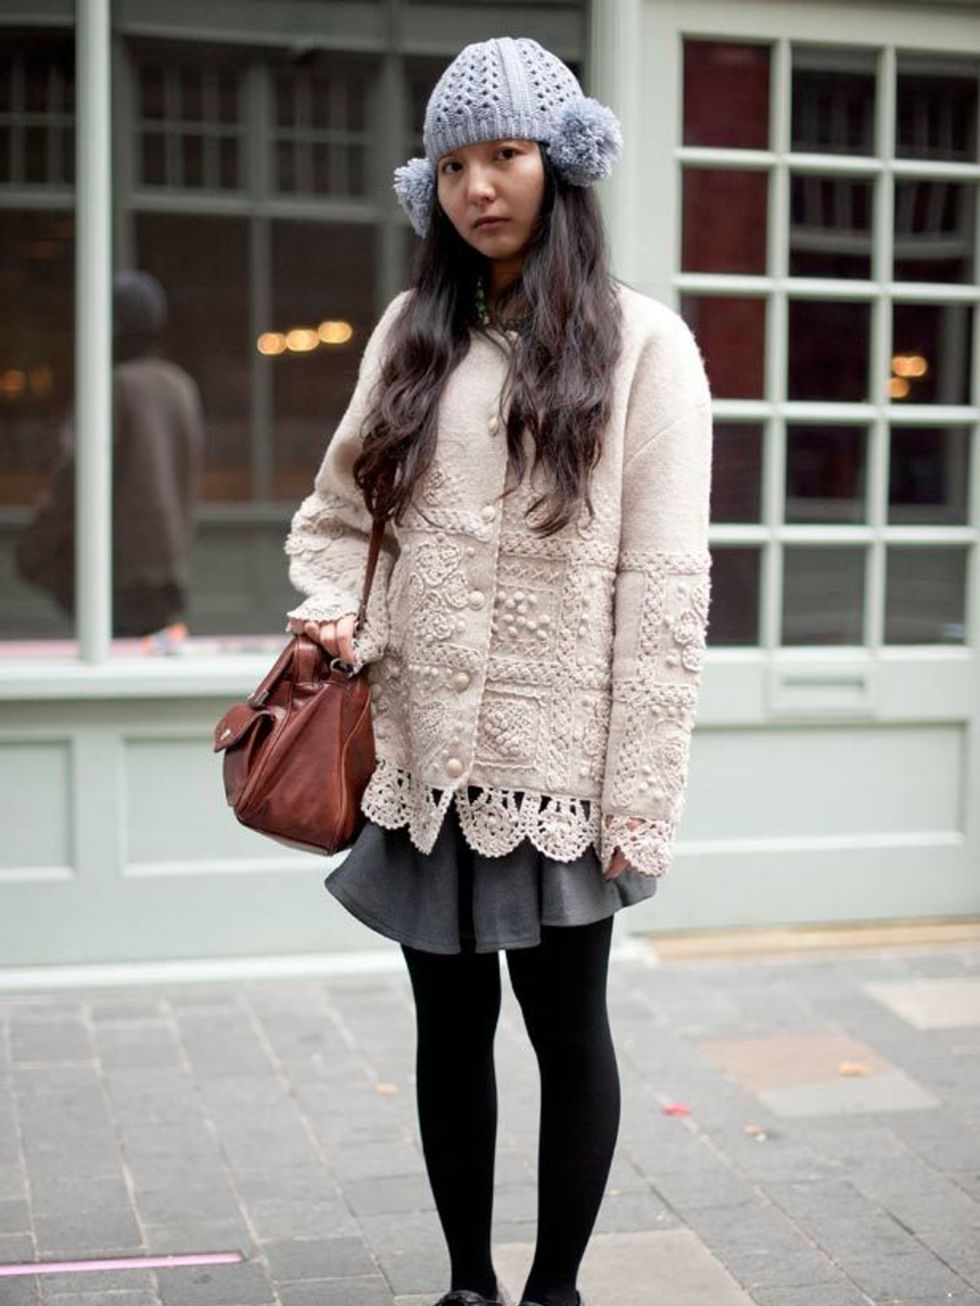 <p>Photo by Kirstin SinclairRan Age, 21, Student. Vintage cardigan and shirt, skirt and hat from China, shoes from Japan, Topshop bag.</p>